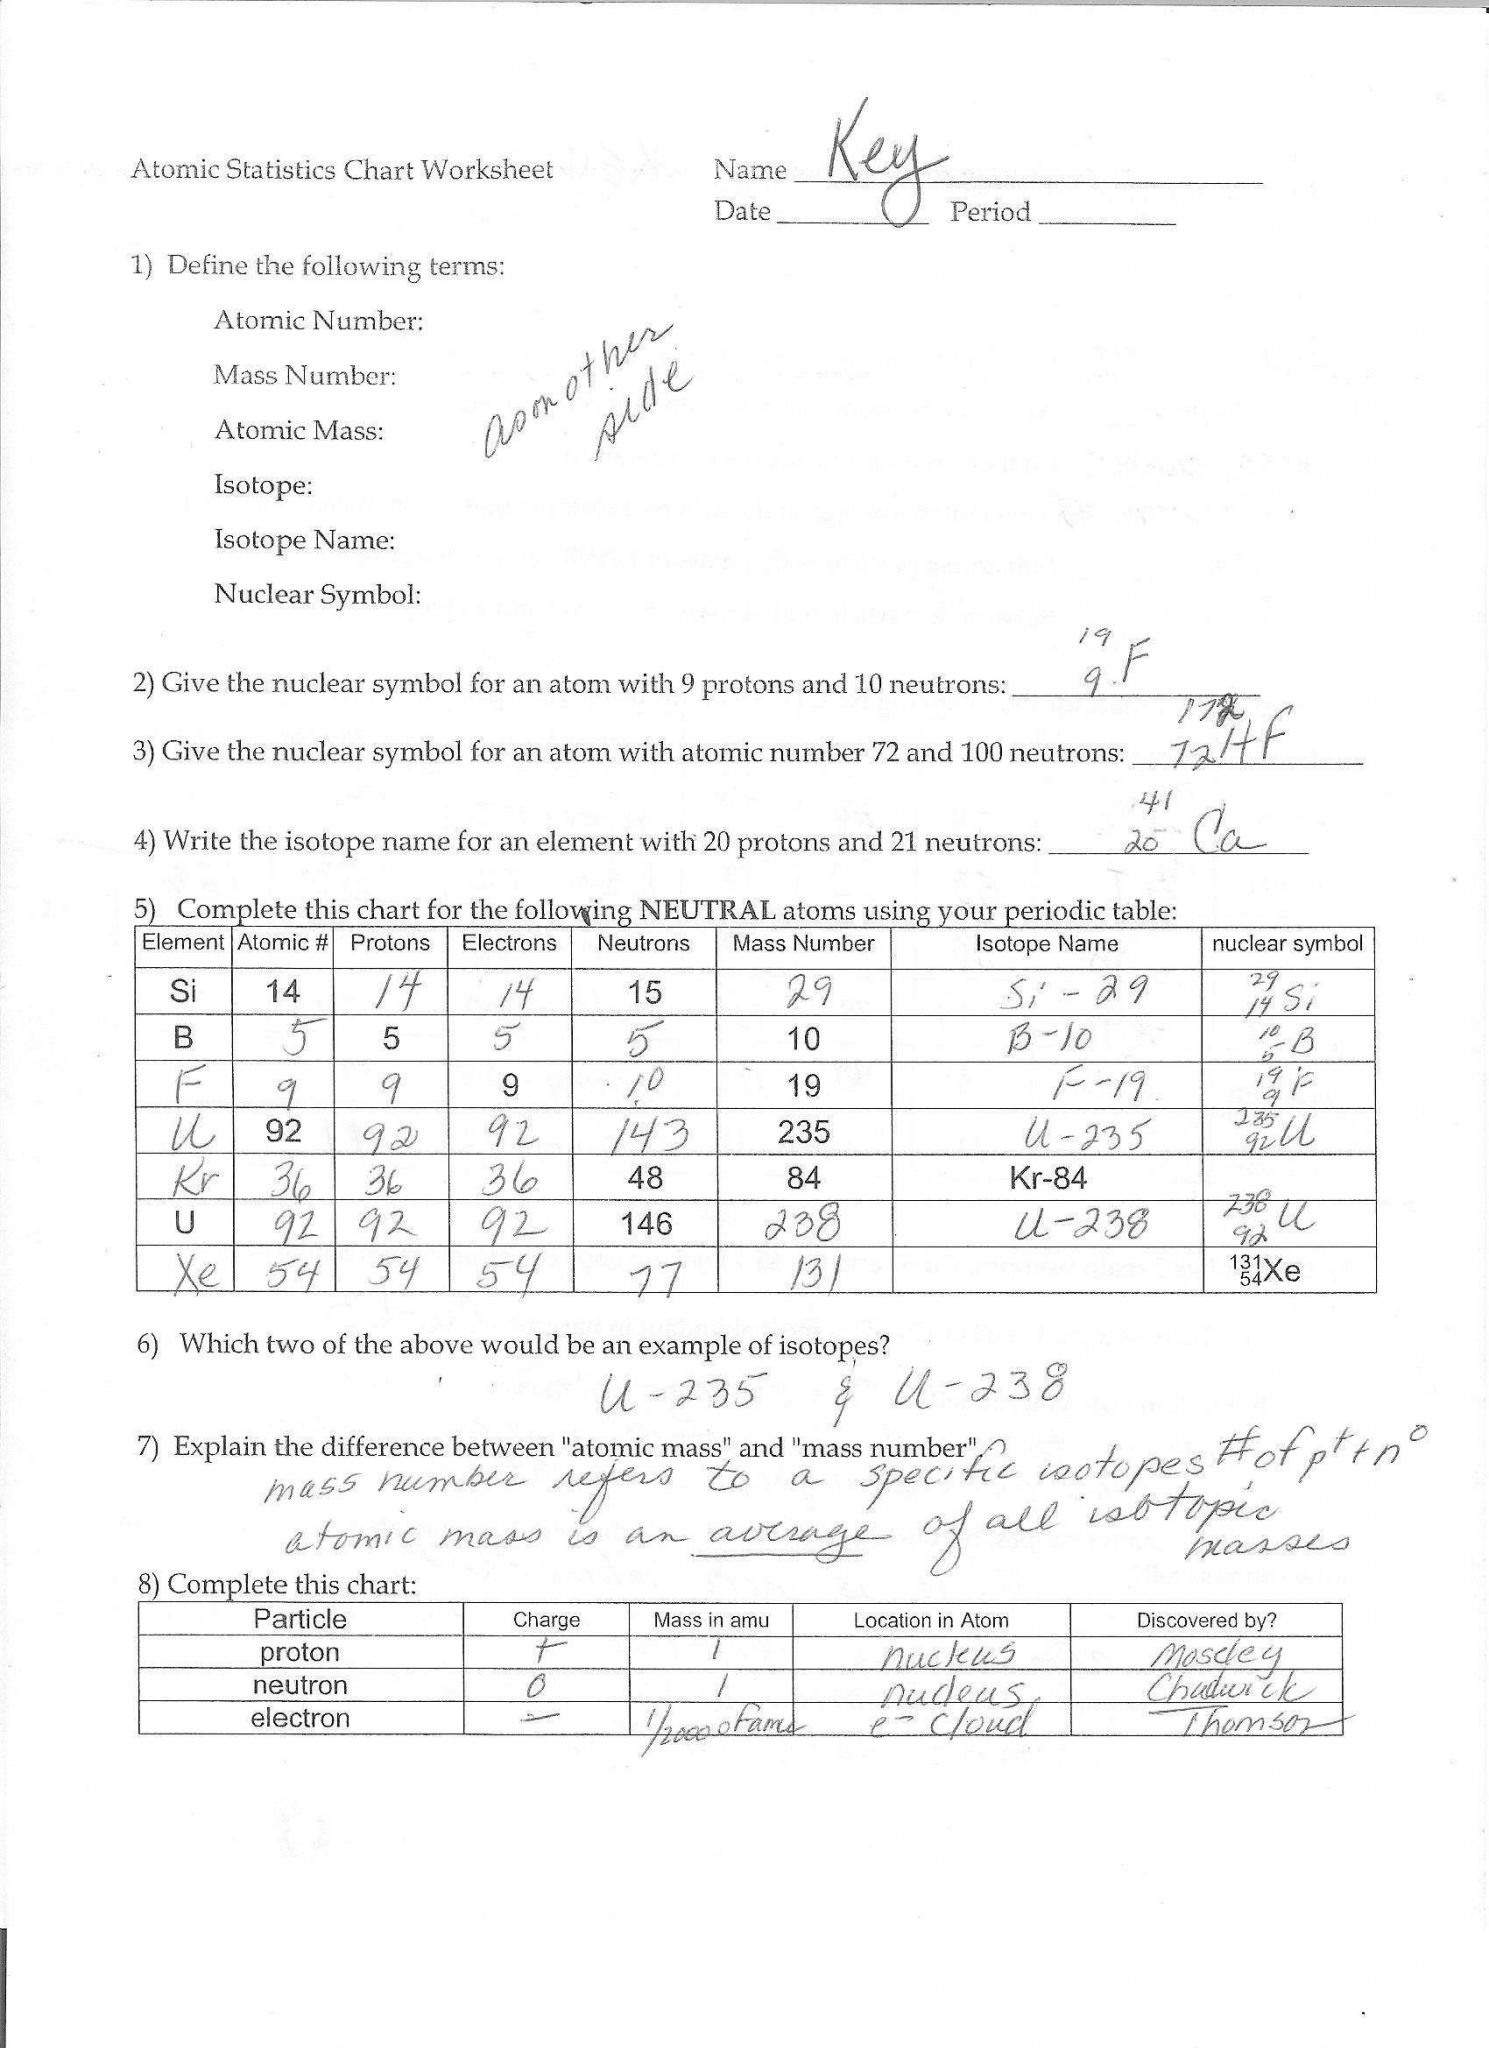 atomic-number-mass-number-and-isotopes-worksheet-teaching-resources